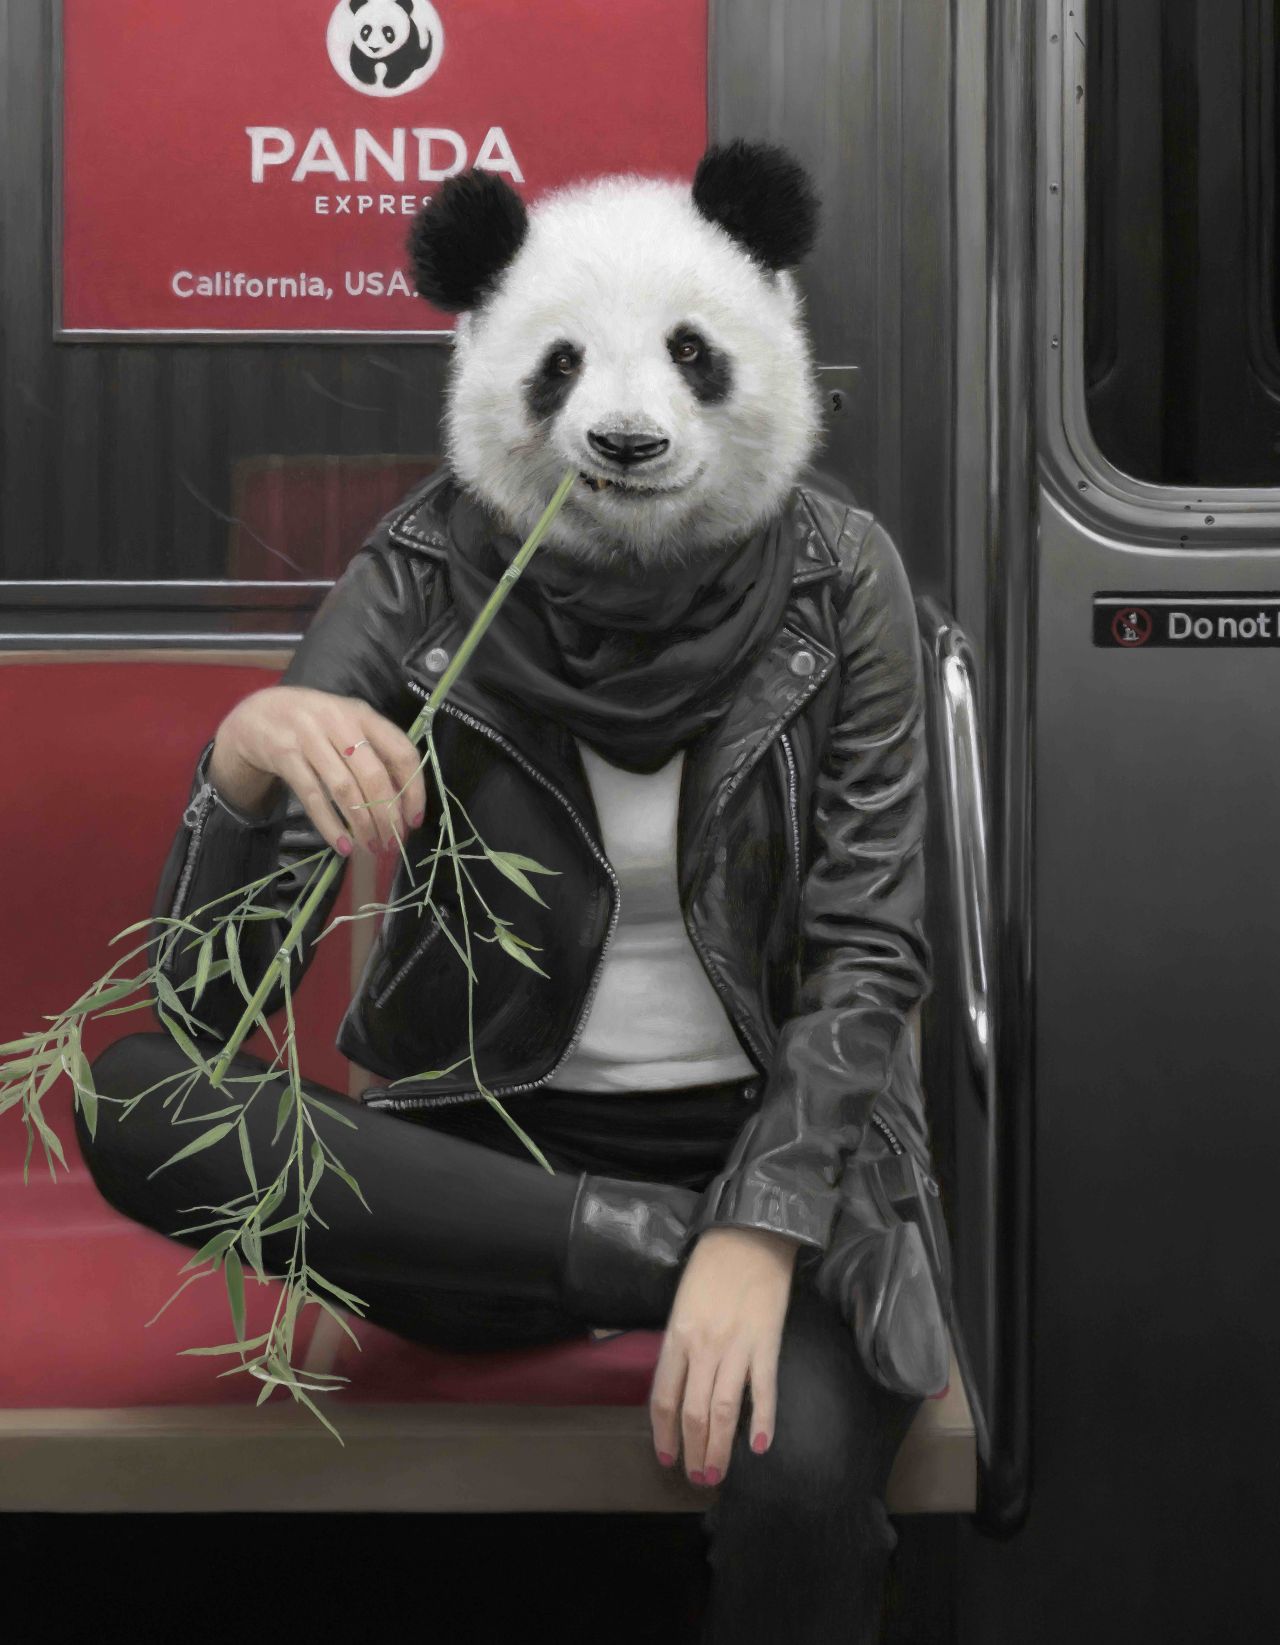 The Panda Express © Matthew Grabelsky. All images courtesy of the gallery and artist